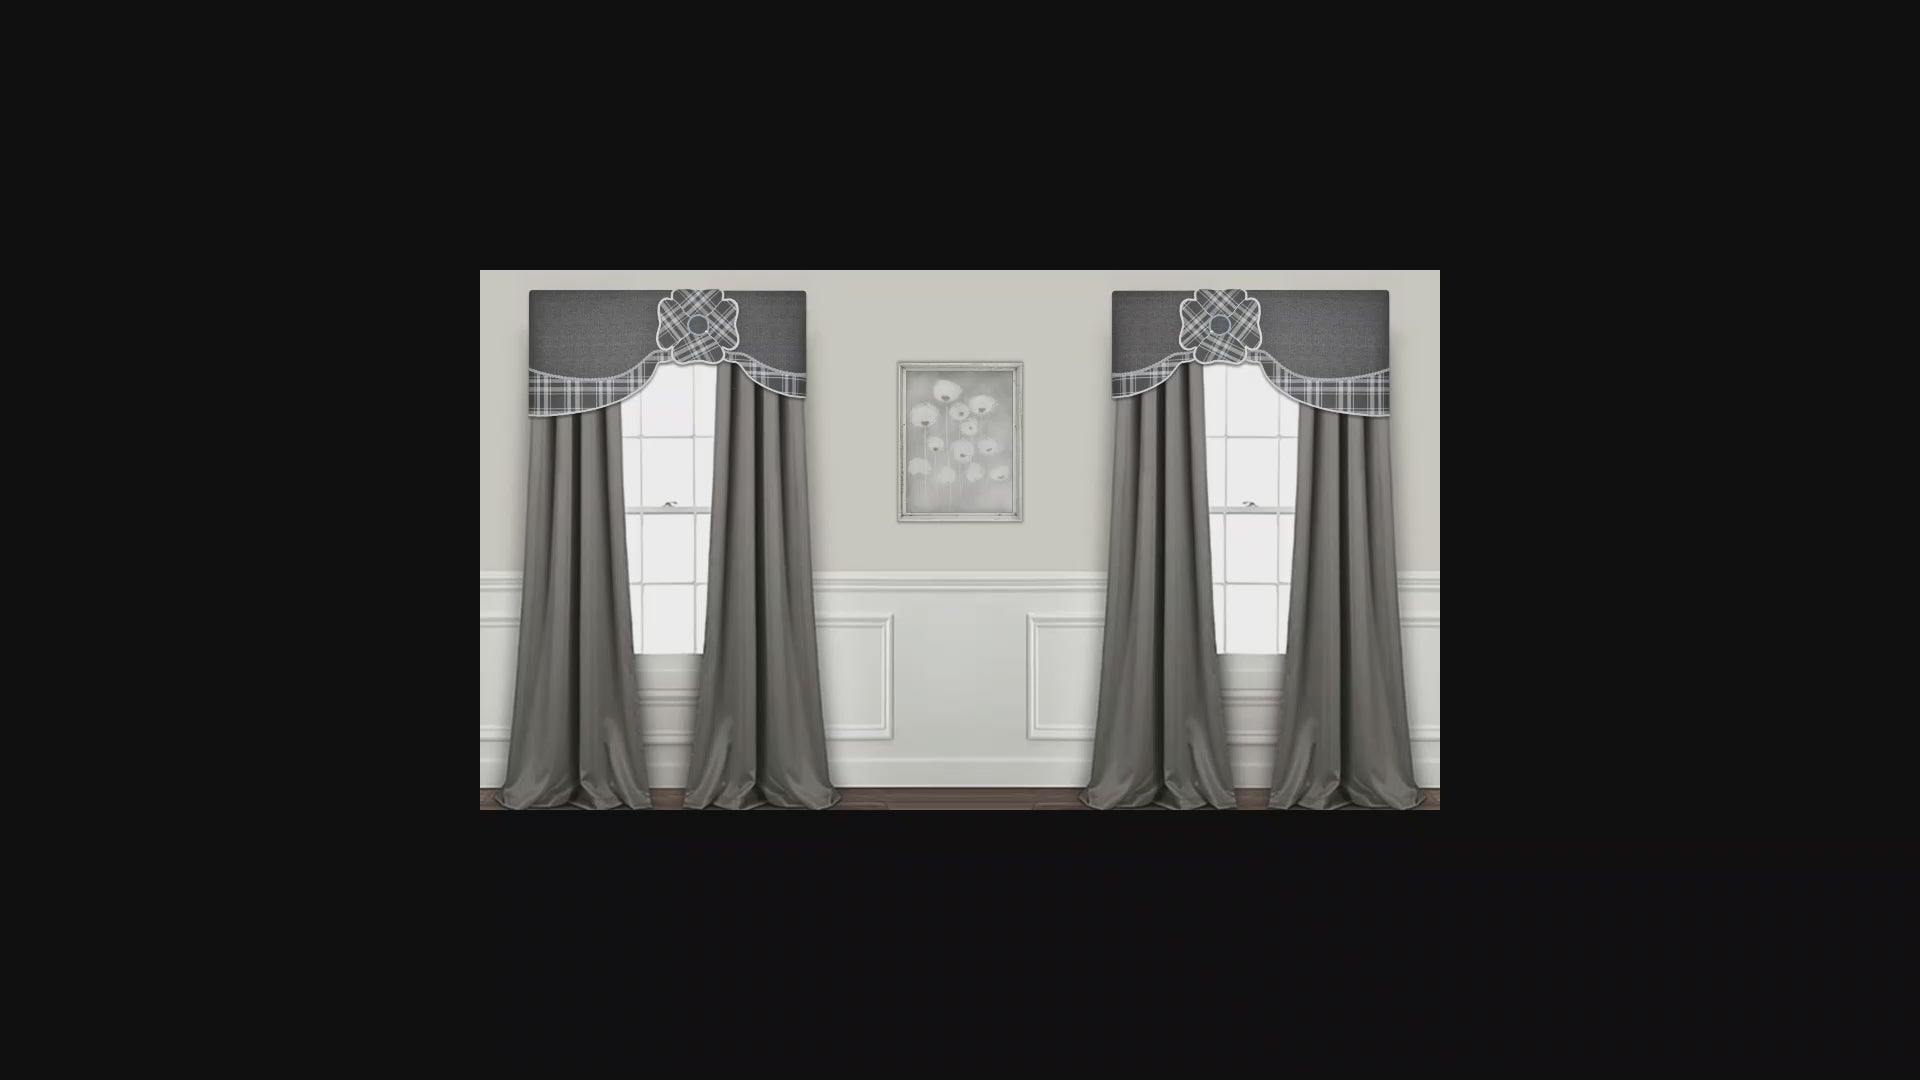 Traceable Designer swag, scarf & blossom no-sew valance kit. Make beautiful custom cornice valances without sewing. DIY home decorating kit is reusable for making unlimited window valances and matching table accents